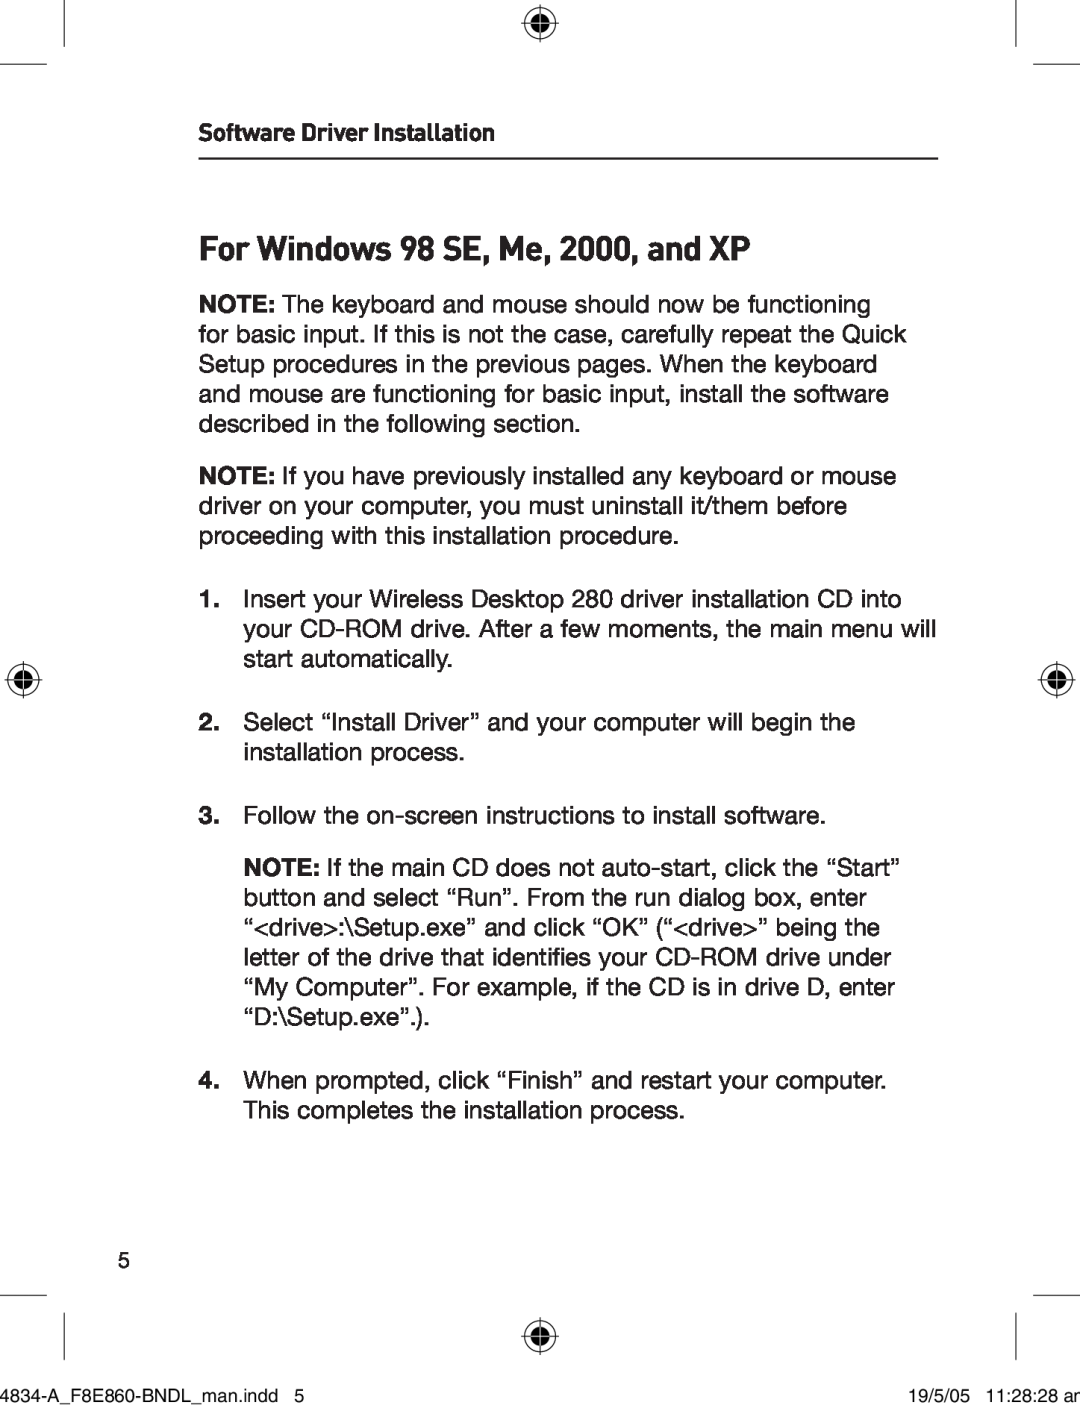 Belkin F8E860-BNDL manual For Windows 98 SE, Me, 2000, and XP, Software Driver Installation 